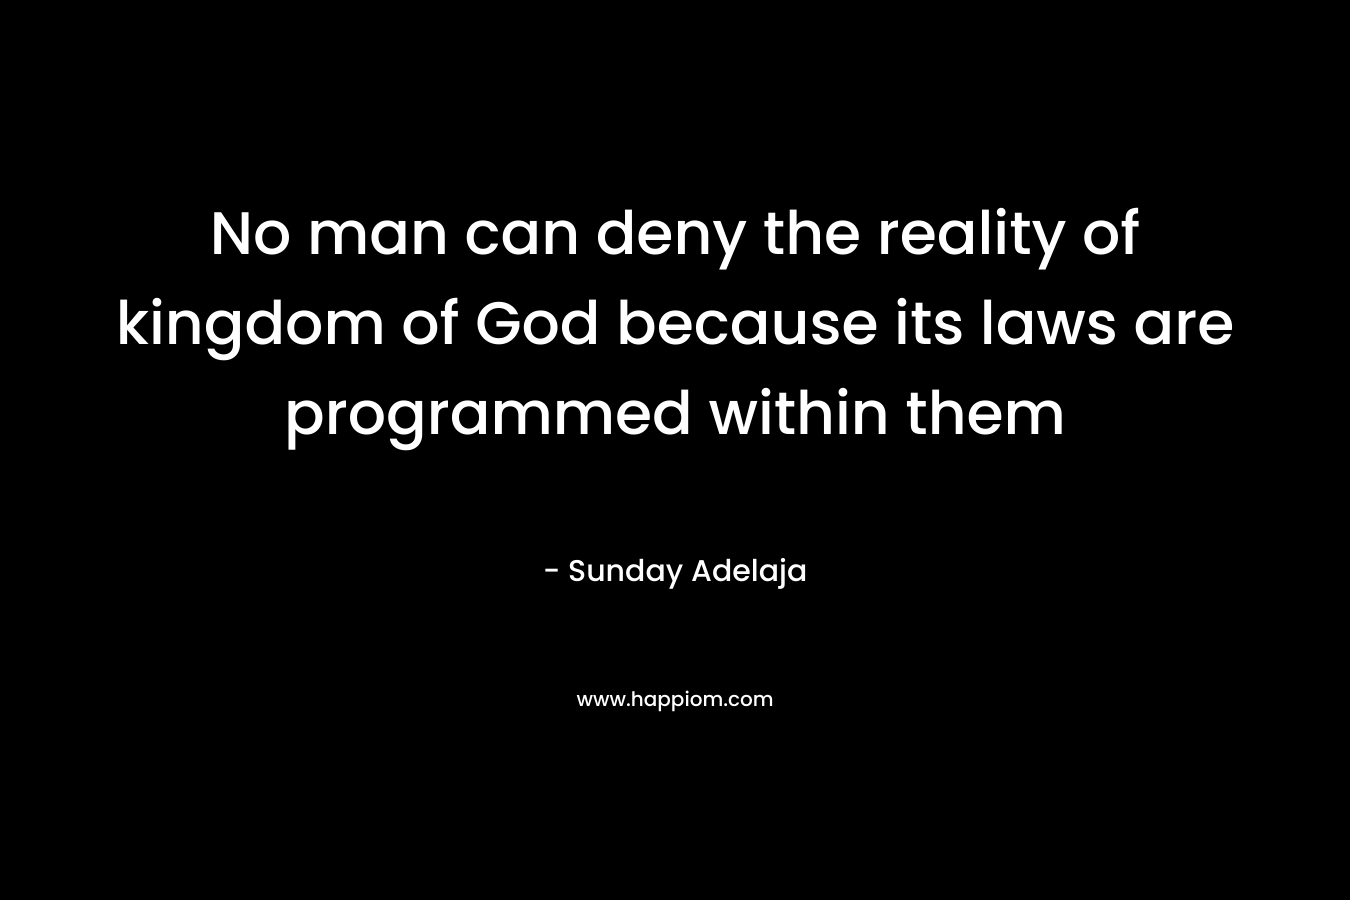 No man can deny the reality of kingdom of God because its laws are programmed within them